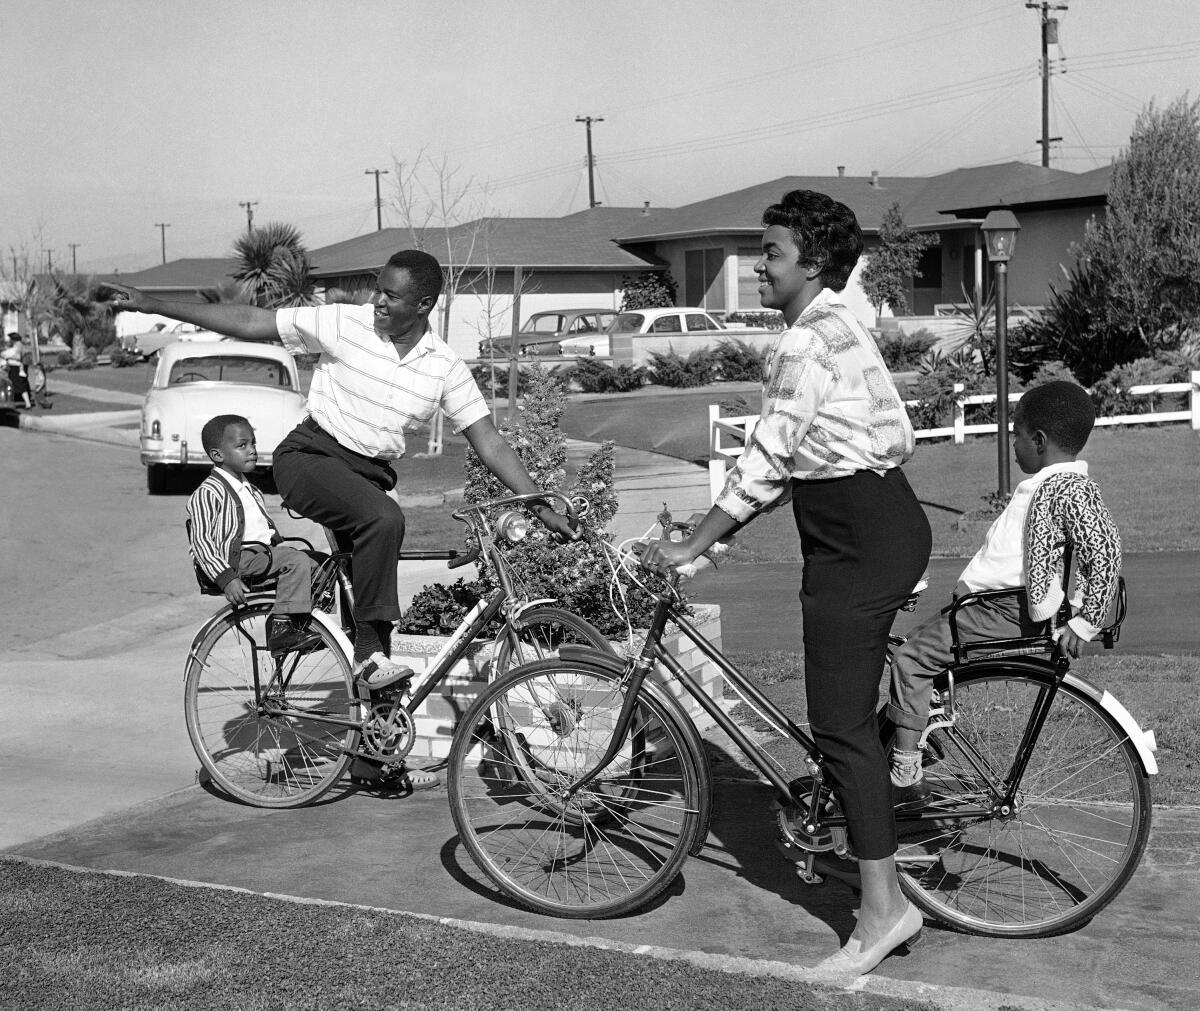 A family of four on bicycles in Gardena in 1962.